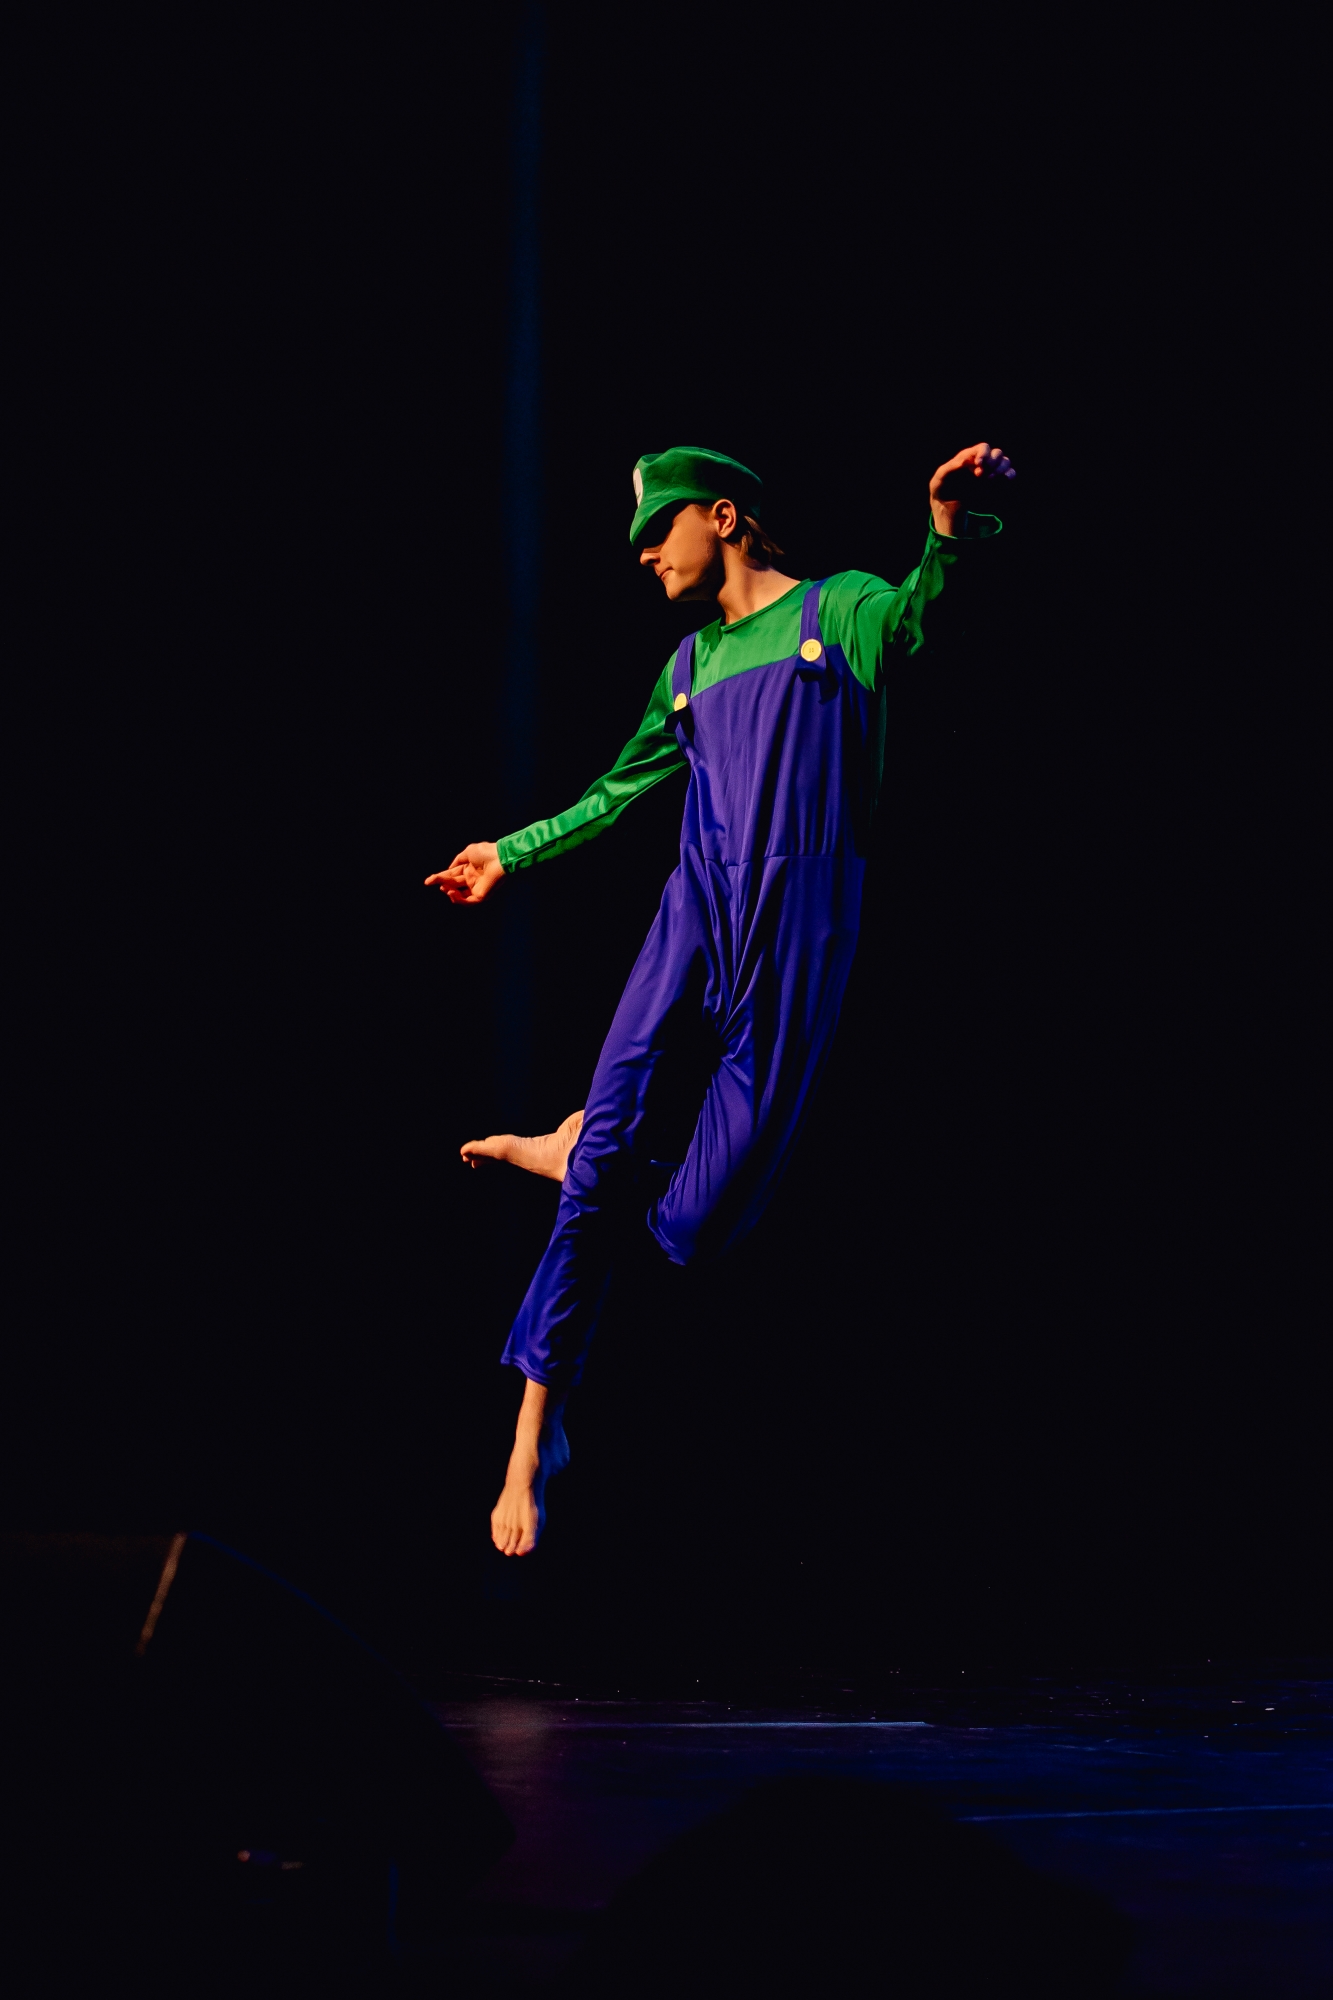 Wagga Wagga High School Learning Support dancer in blue overalls and green top leaping into the air